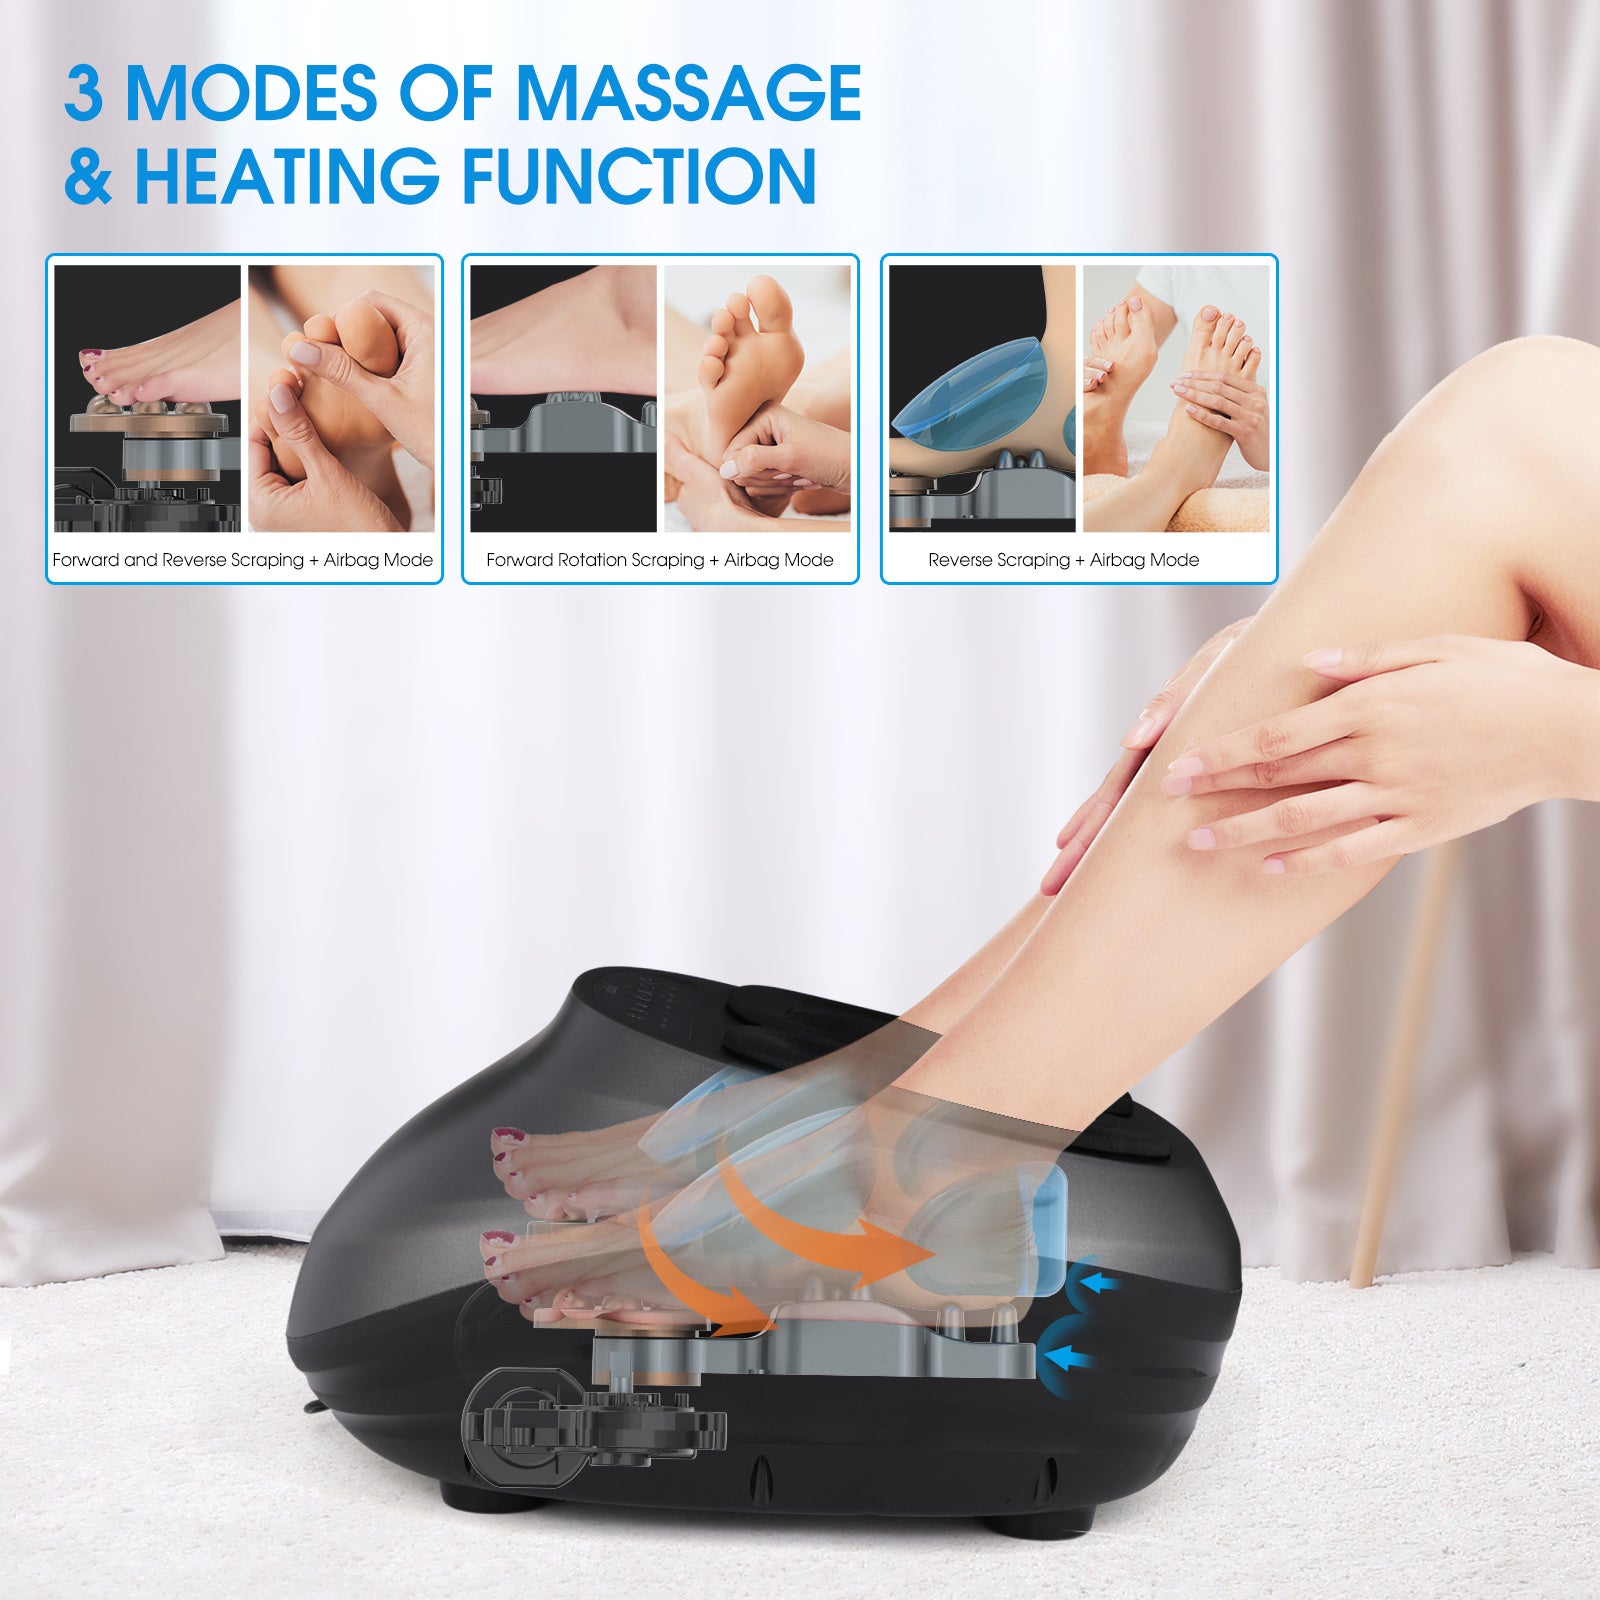 Image showing the 3 modes of massage & heating function.